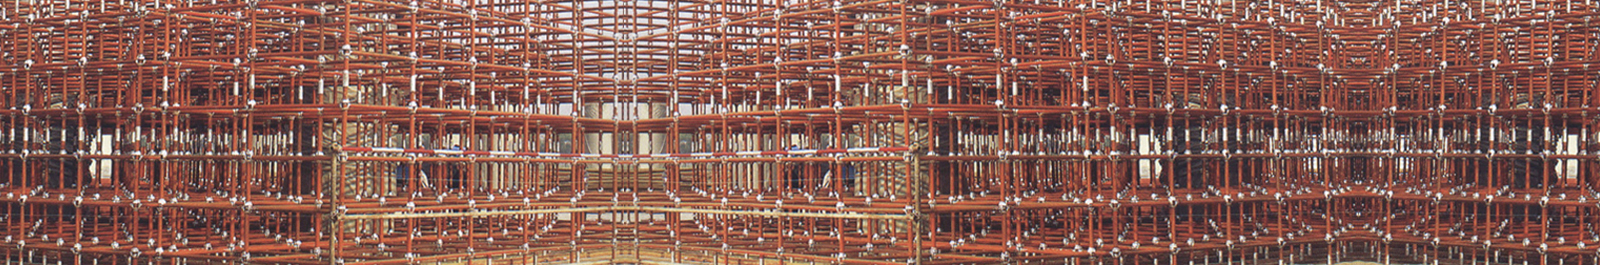 Scaffolding Products Manufacturer and Supplier in Hyderabad India | PAAM Group